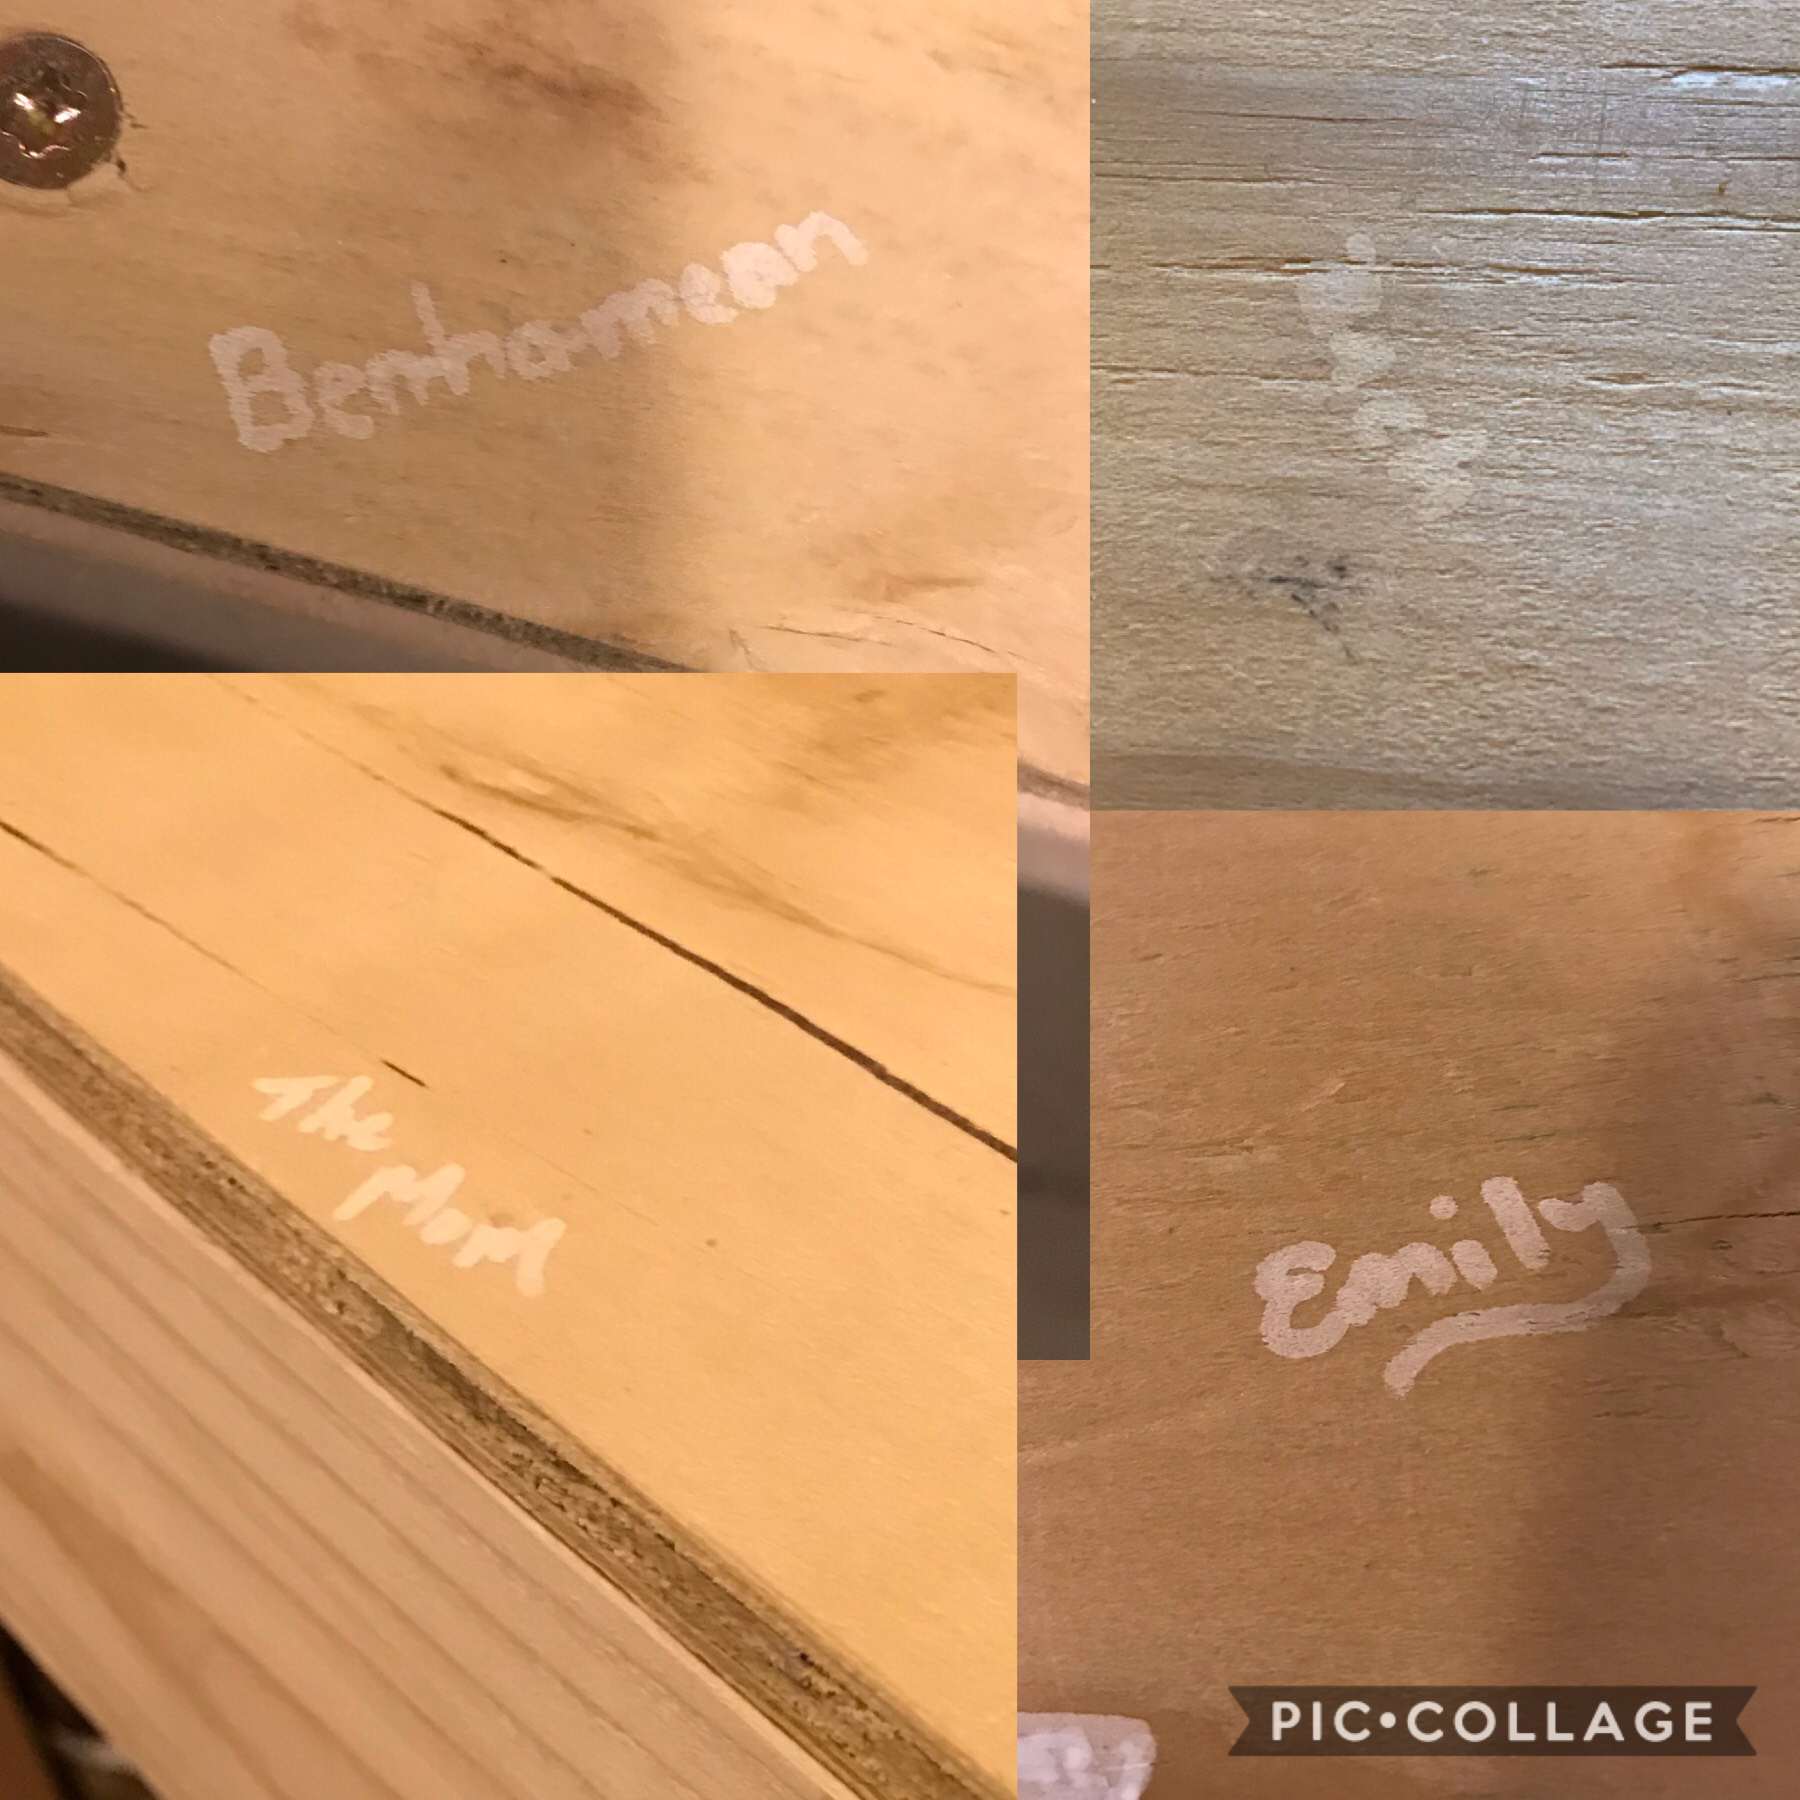 we’re redoing our kitchen so we have a piece of plywood as our countertop rn so i got my family to sign it lol (i’m emily, my brothers are benjamin (he spelled his name weirdly lol) and zach)